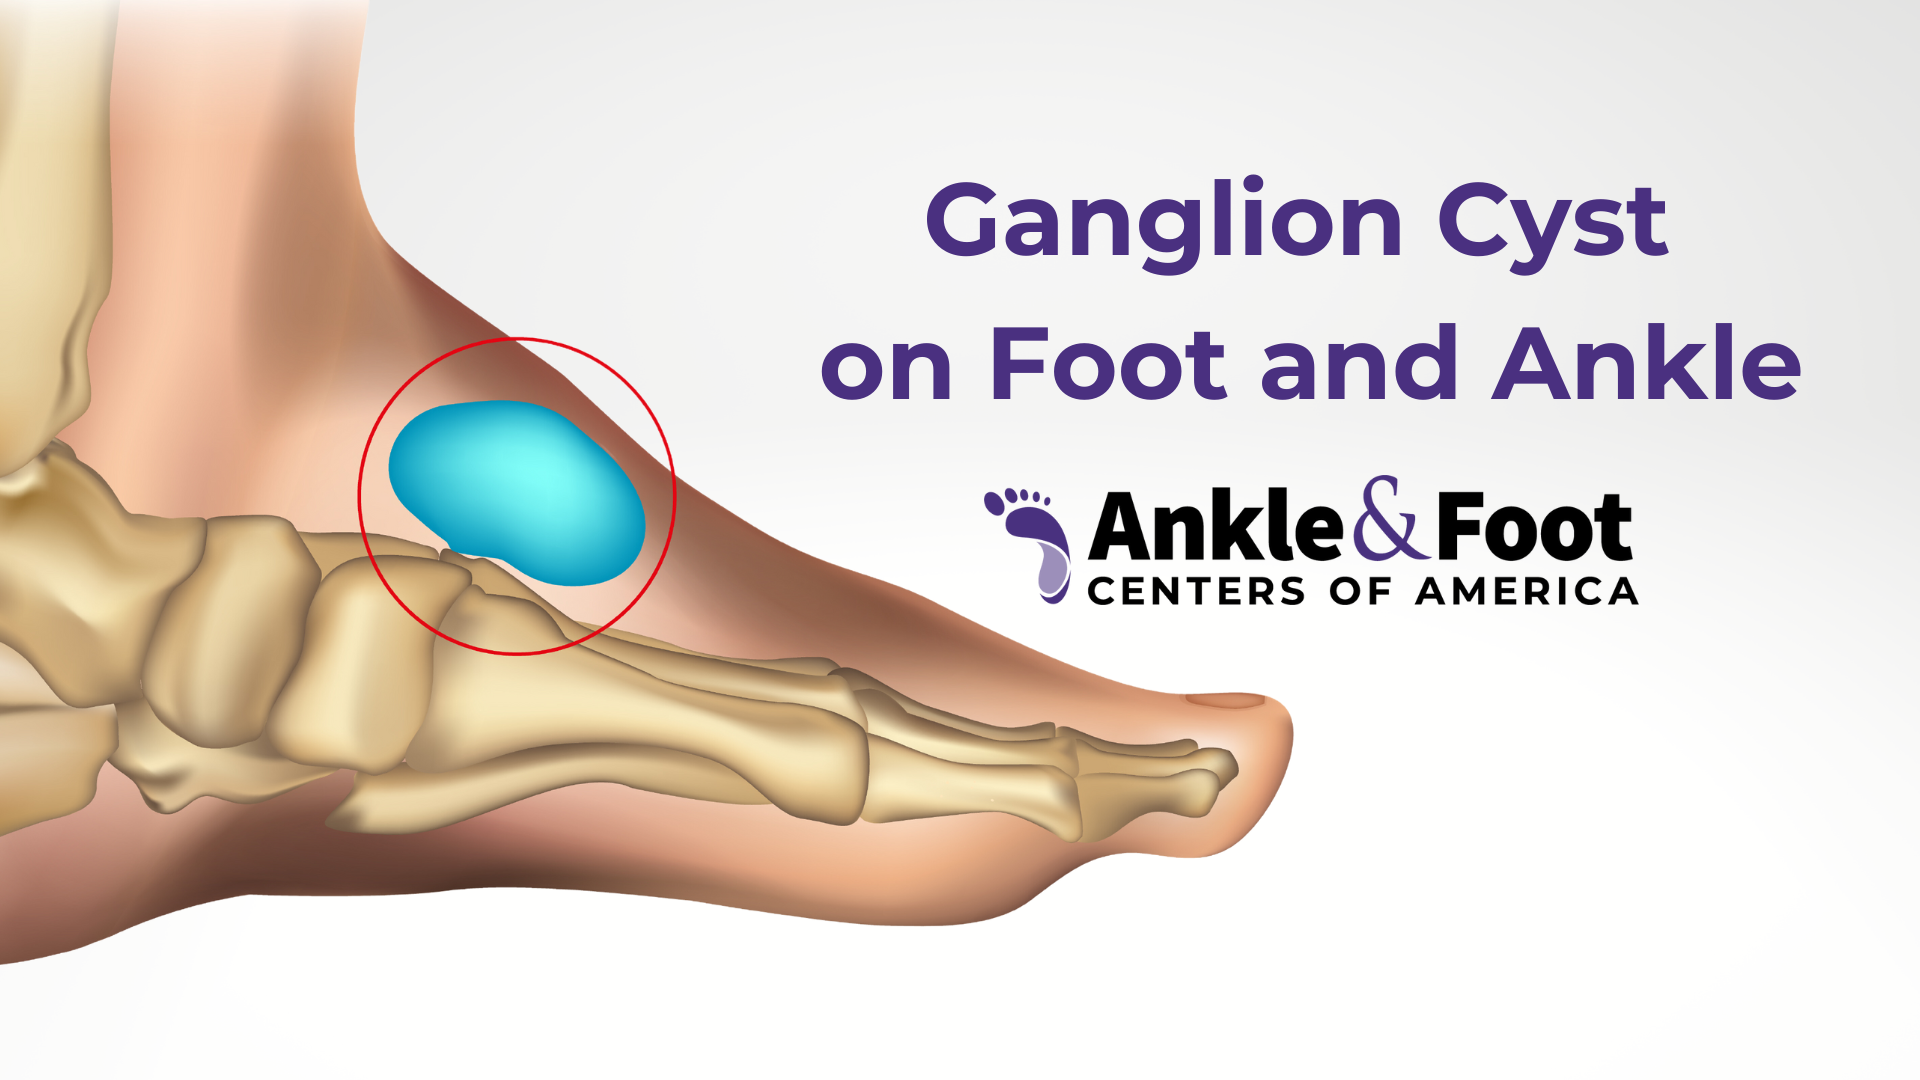 What is a Ganglion Cyst on Foot and Ankle?